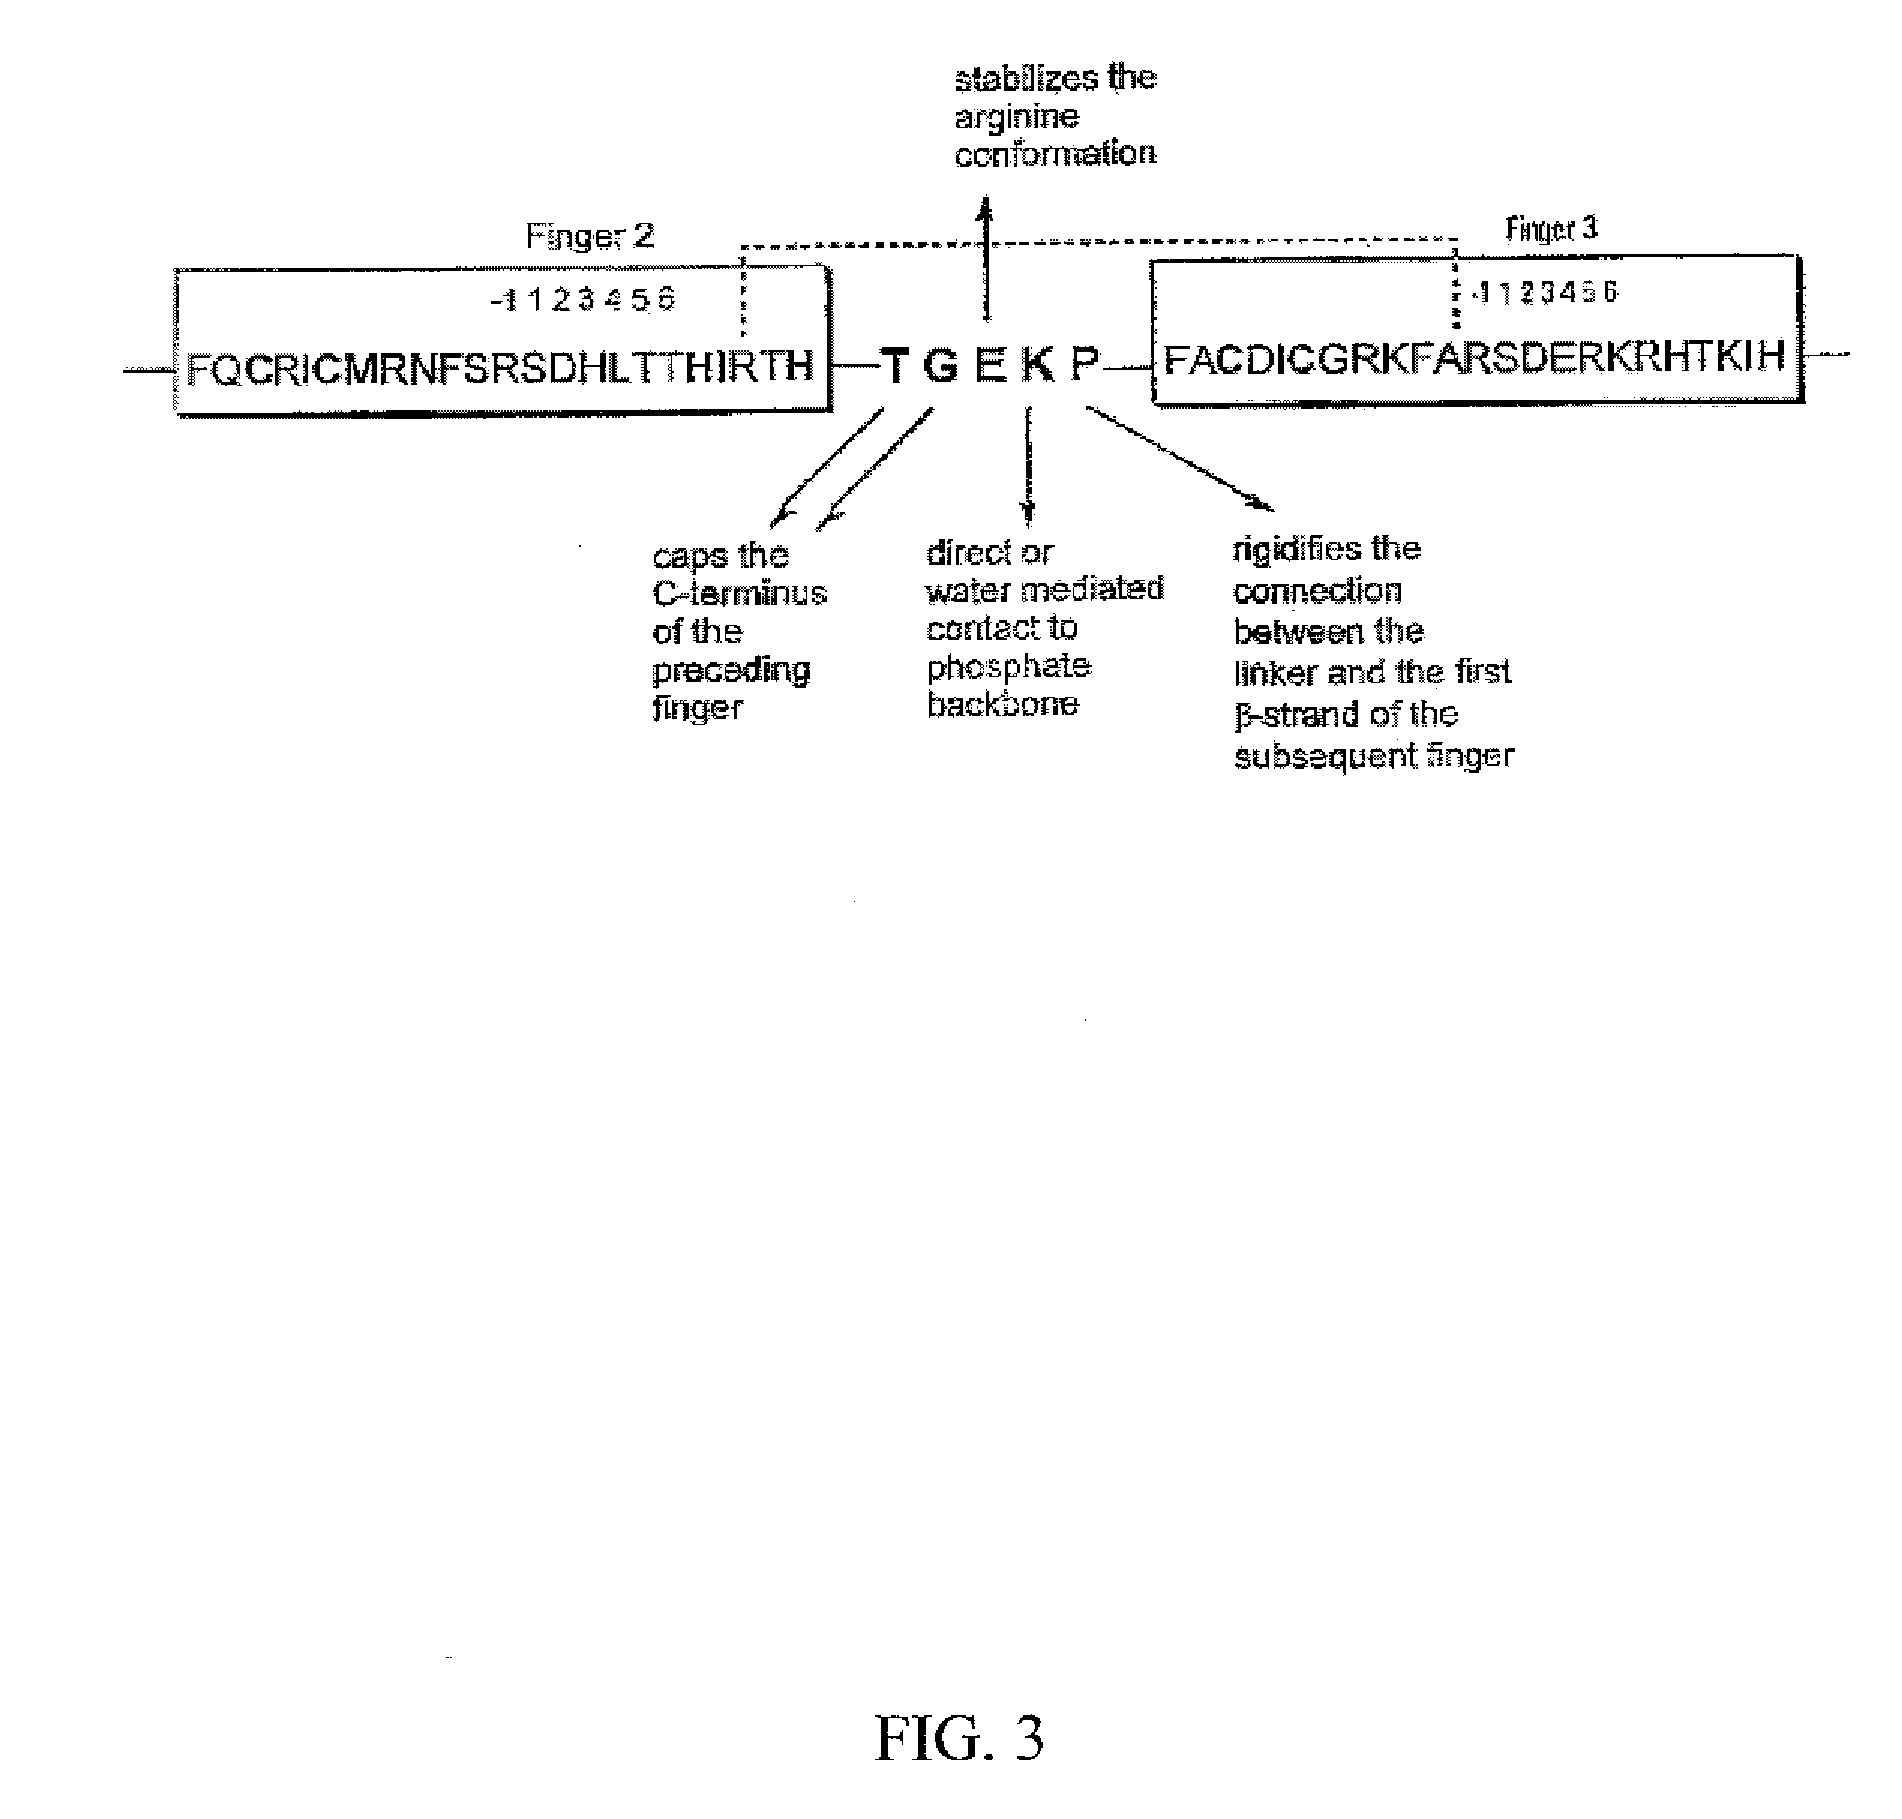 Zinc finger domains specifically binding agc